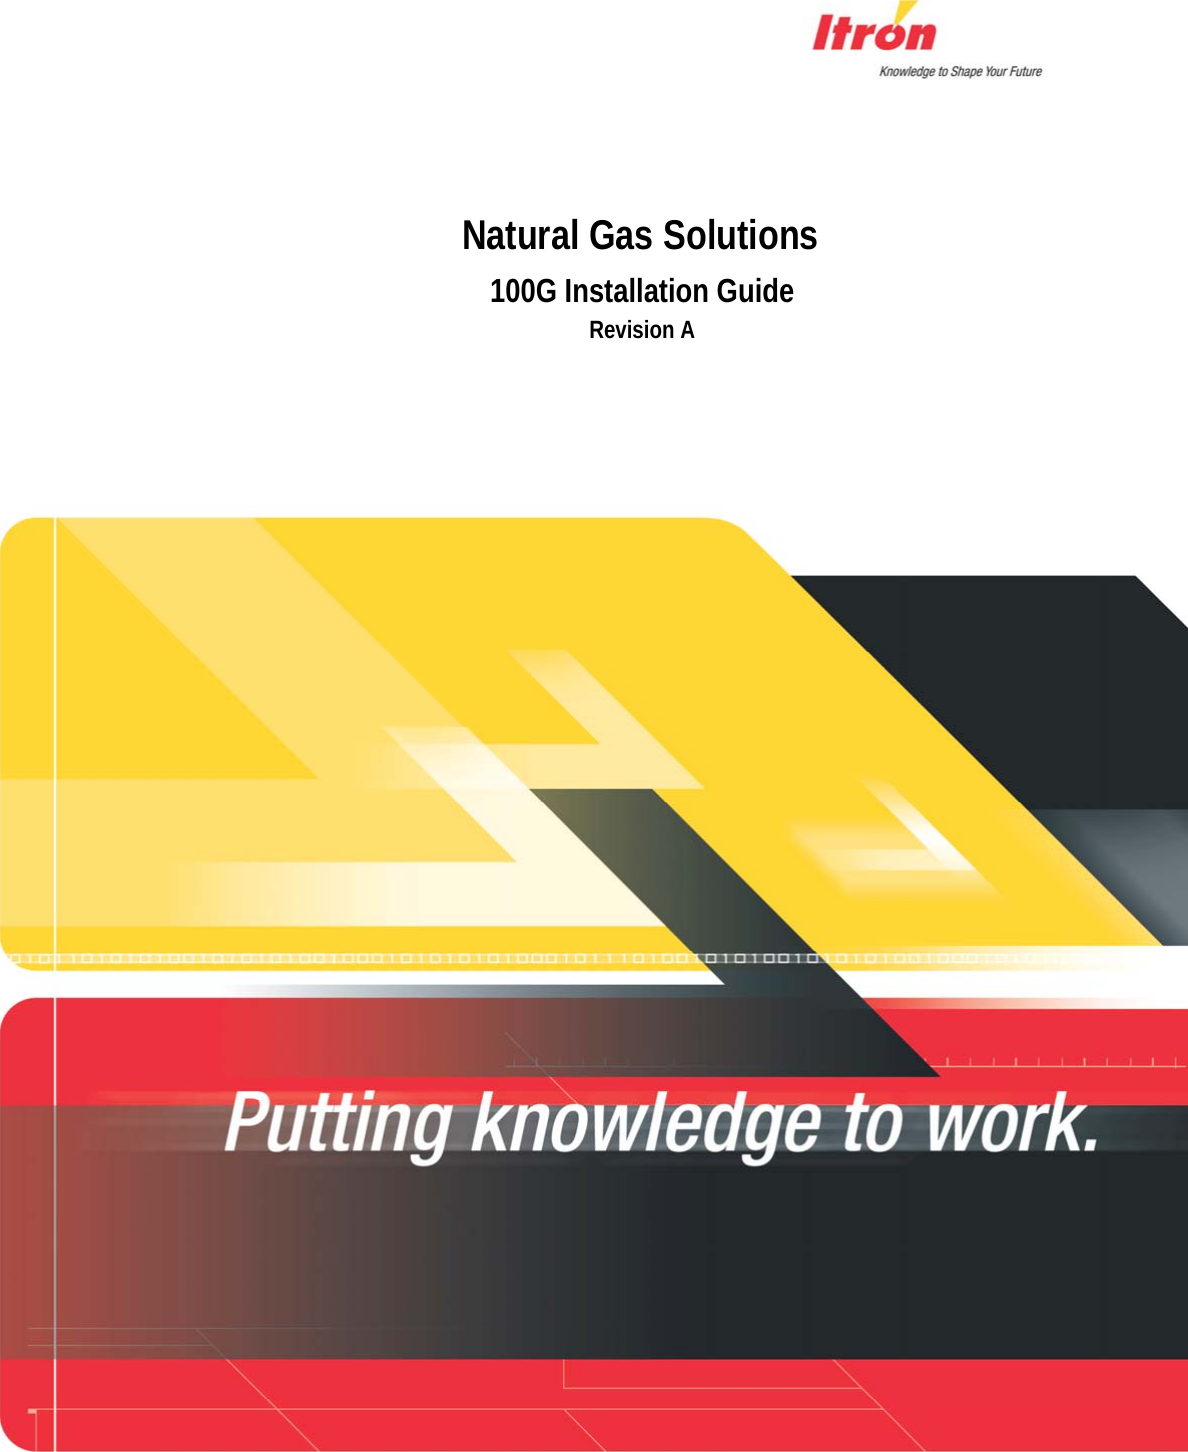    Natural Gas Solutions 100G Installation Guide Revision A    